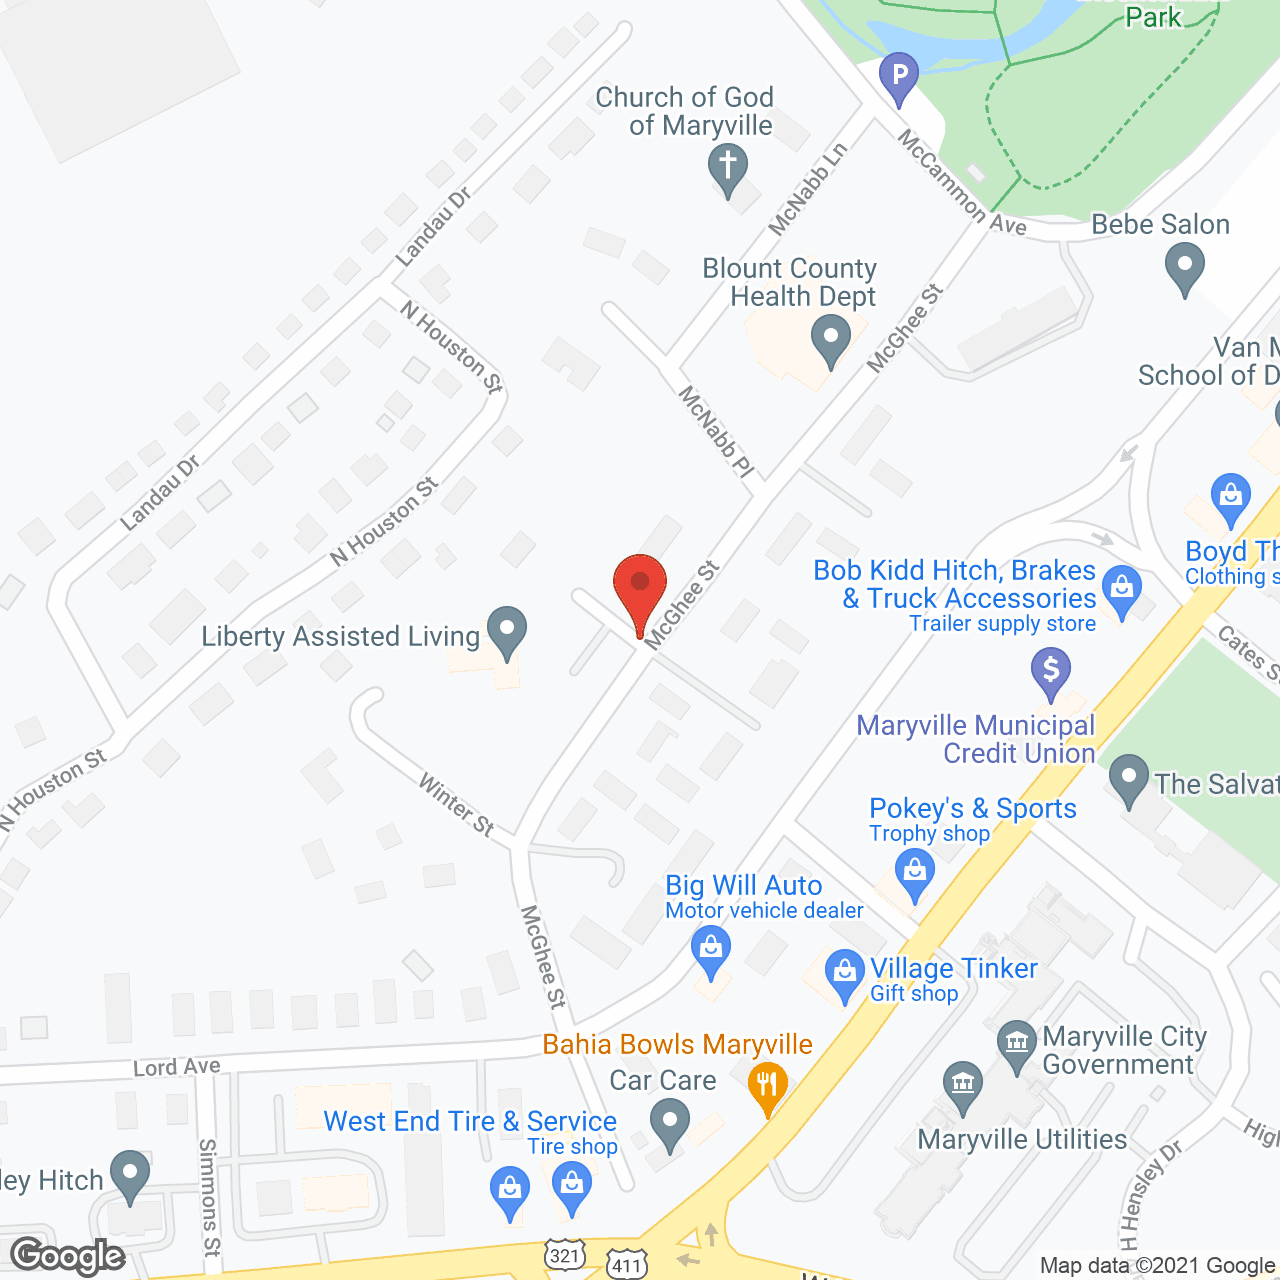 Liberty Assisted Living in google map